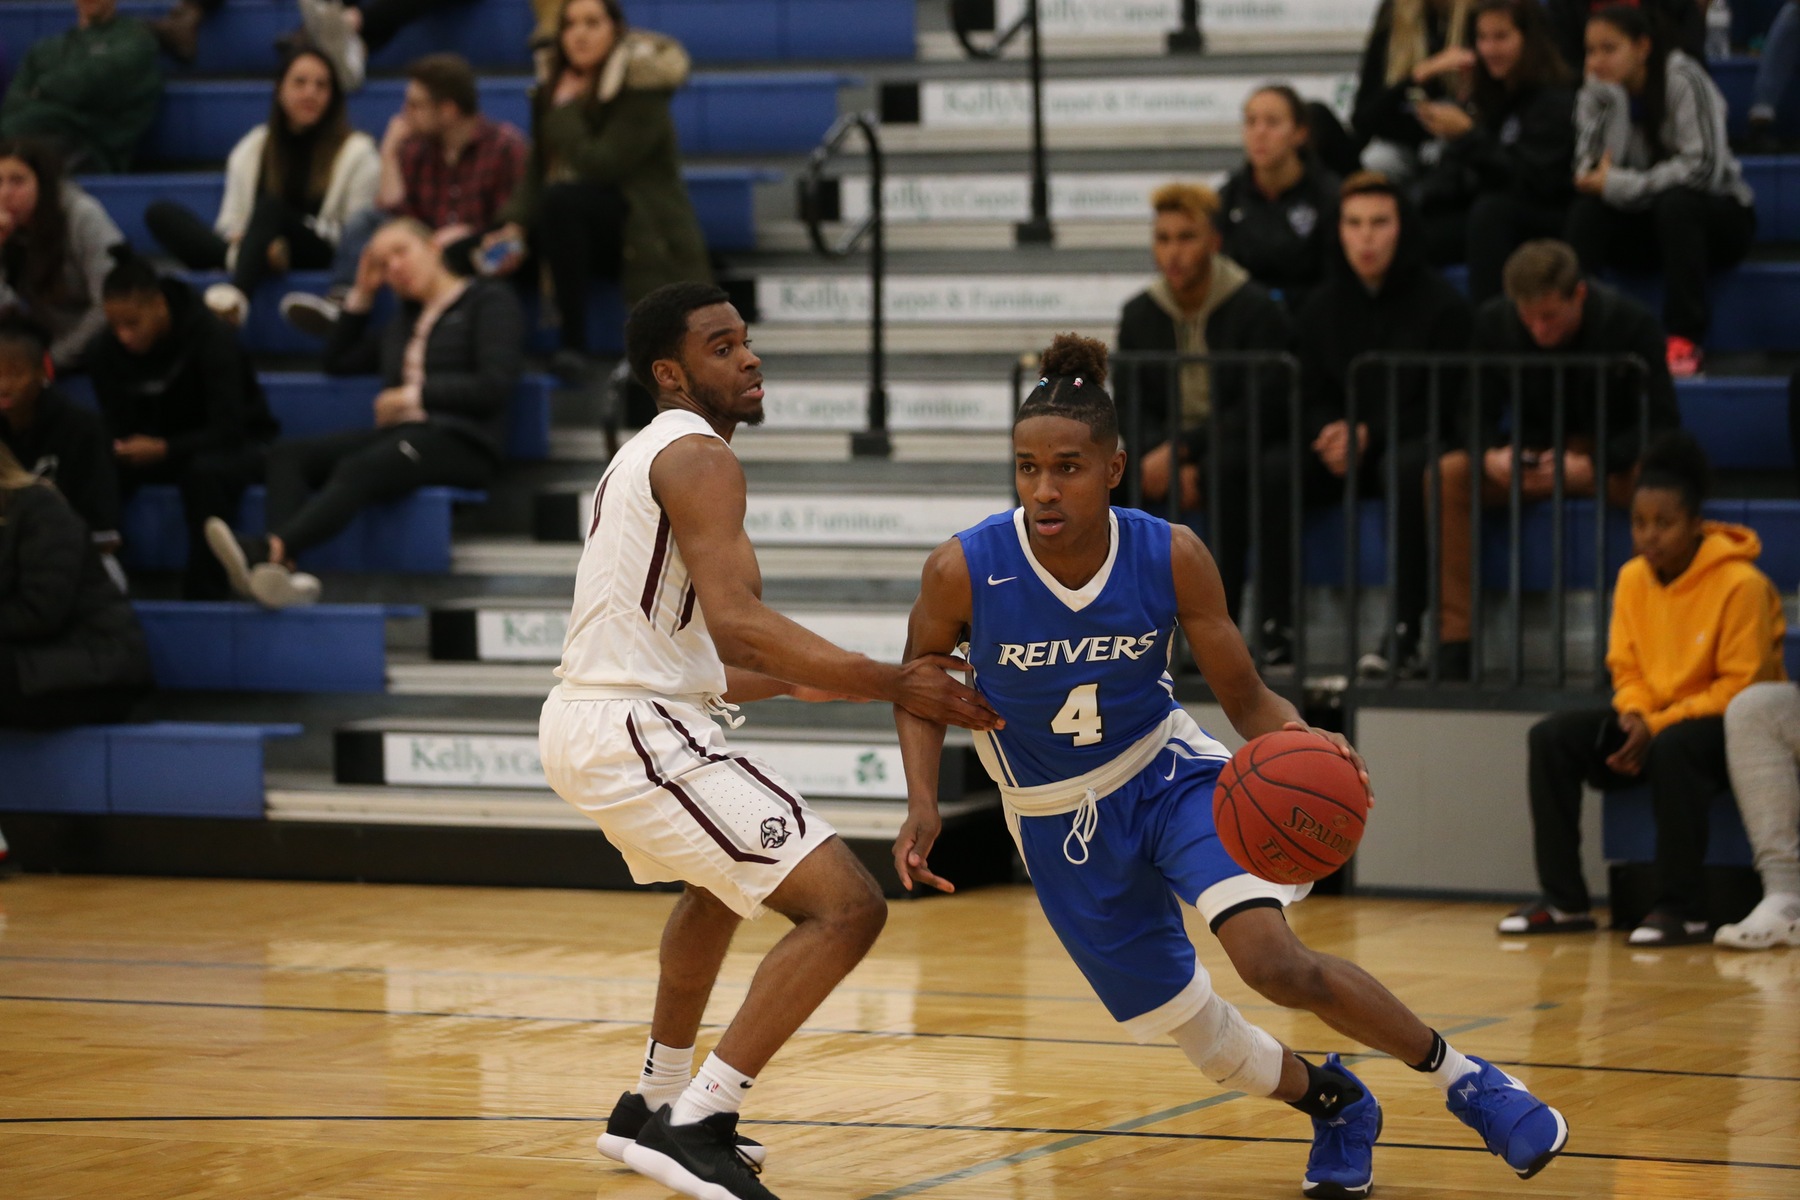 Shadeed Shabazz's 22 point effort at Indian Hills was not enough as The #22 ranked Reivers lost to the #2 ranked Warriors 84-72 in Ottumwa, IA Saturday night (1/27/18).